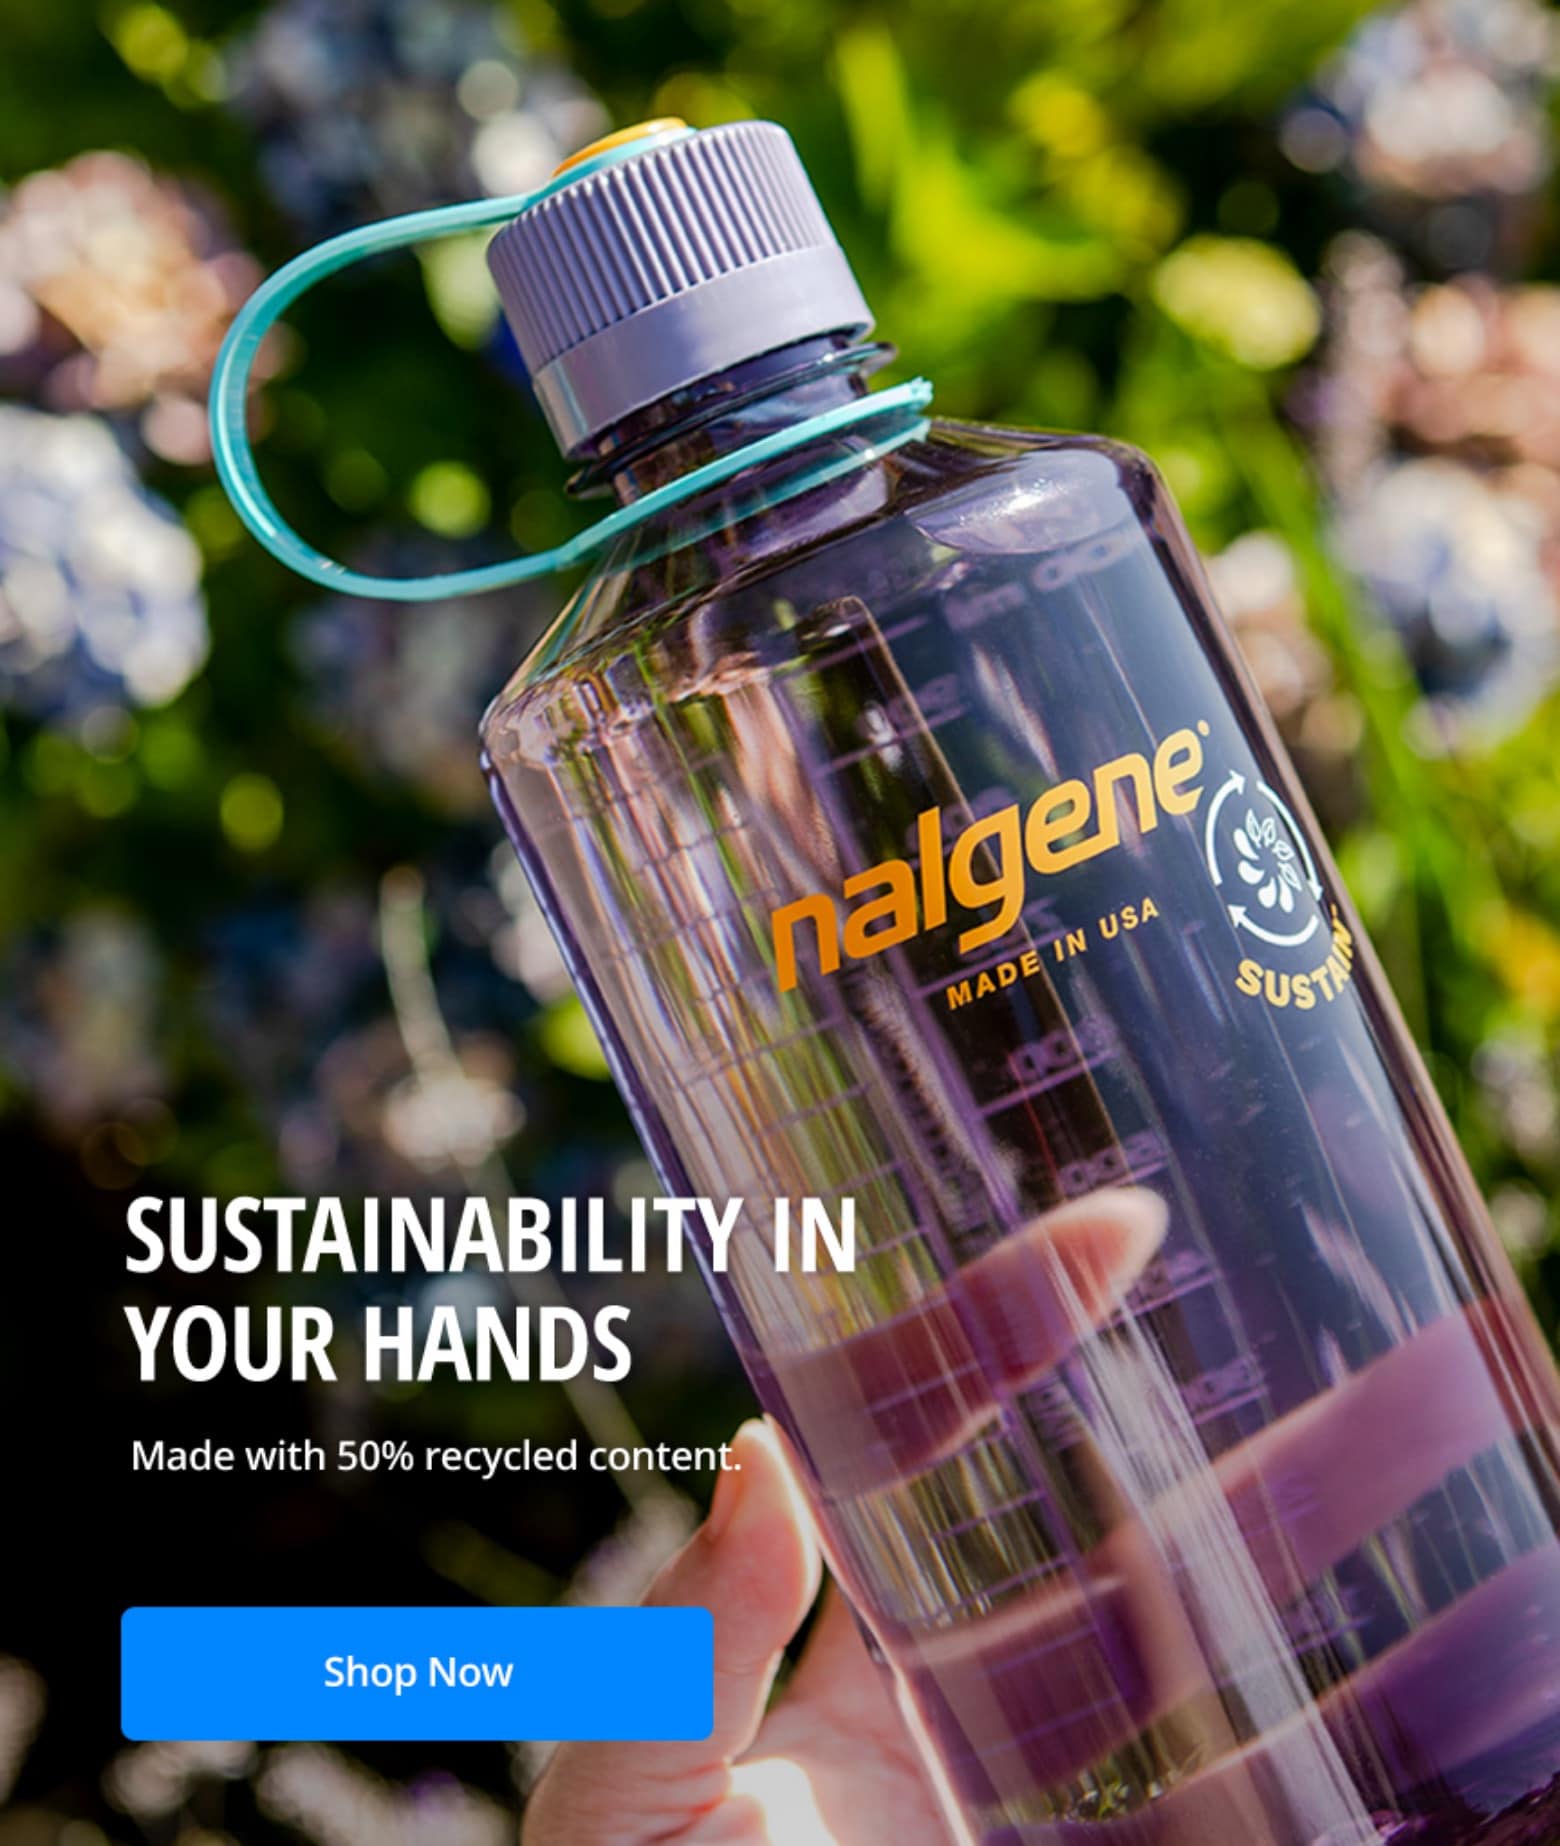 image of a nalgene water bottle with blurry background of nature "Sustainability in your hands. Made with 50% recycled content. Shop Now"